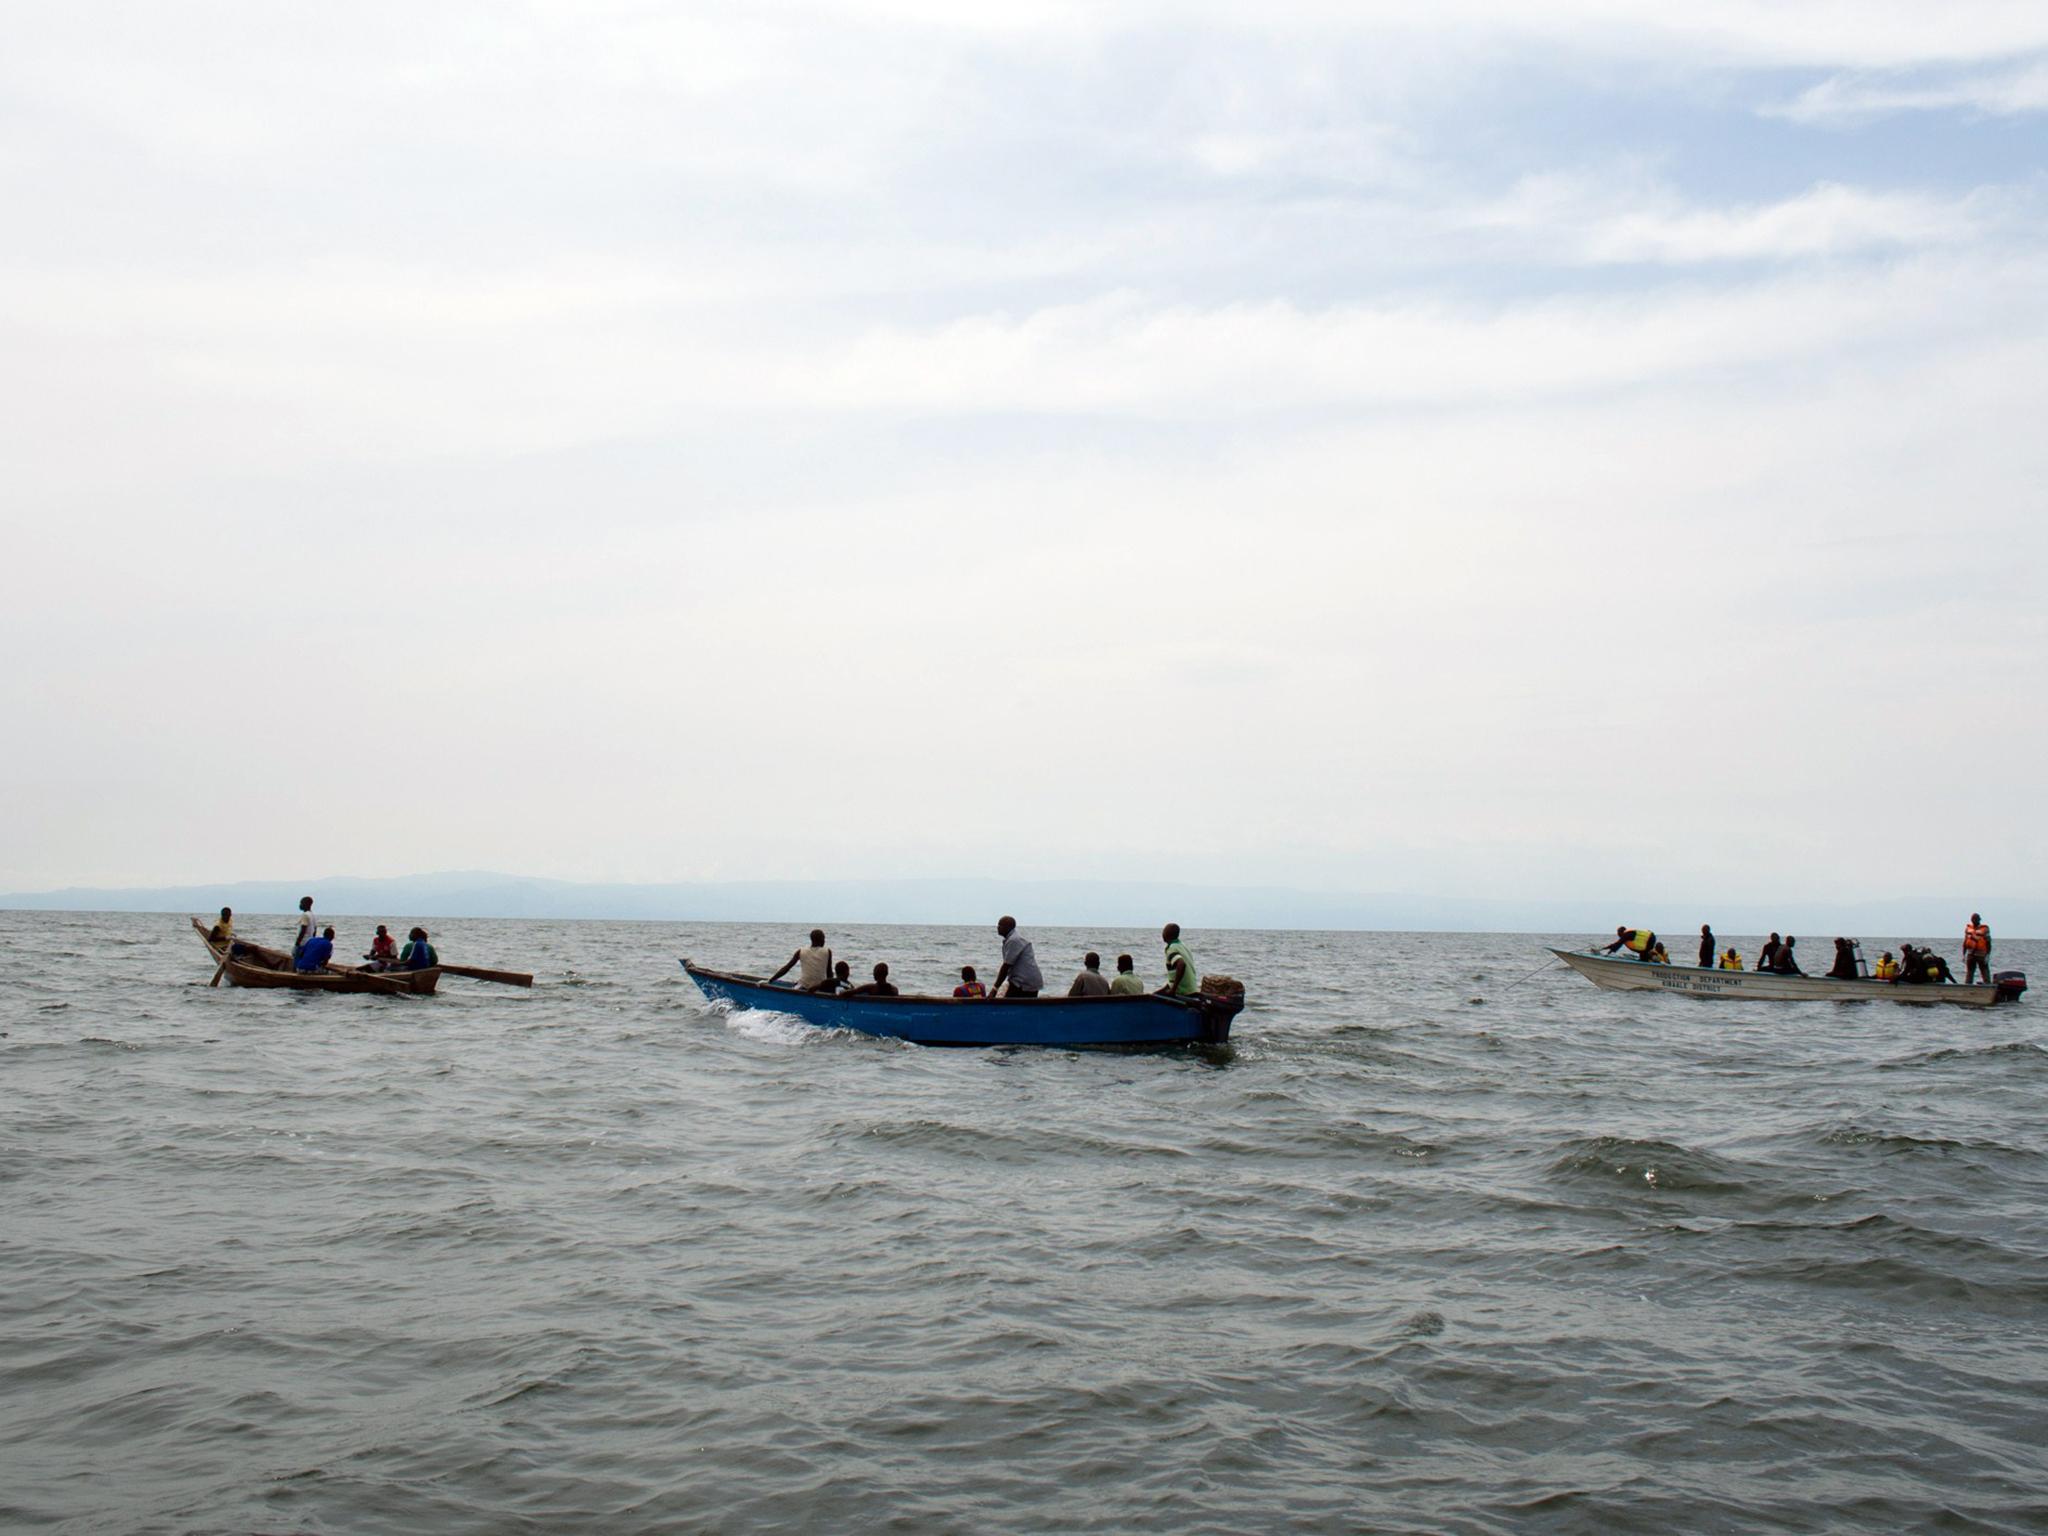 Uganda Police divers and local fishermen search for victims of a boat disaster on Lake Albert on 23 March, 2013